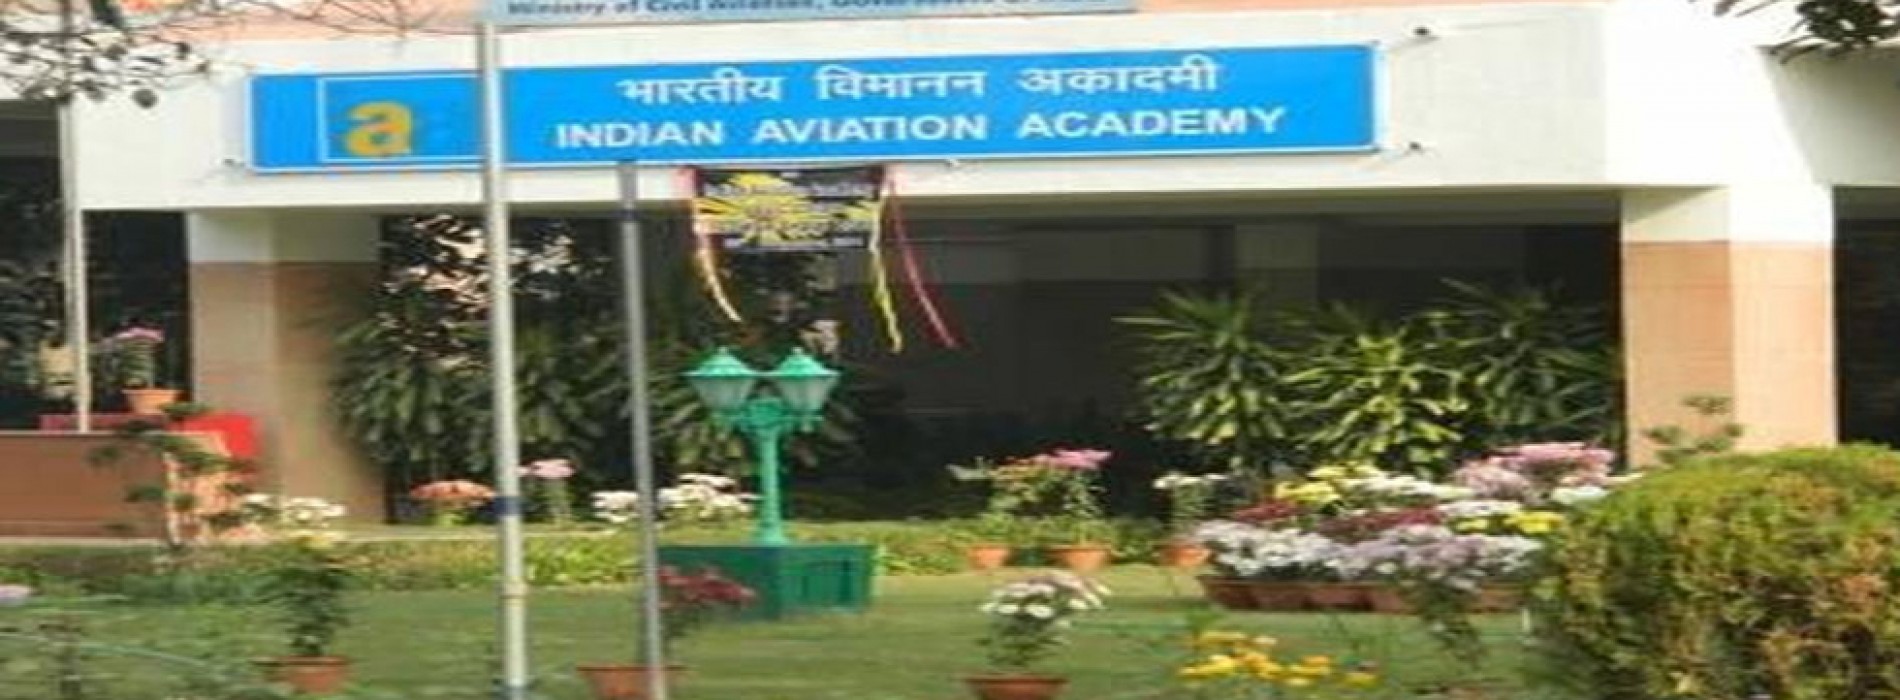 Delhi gets new campus for Indian Aviation Academy